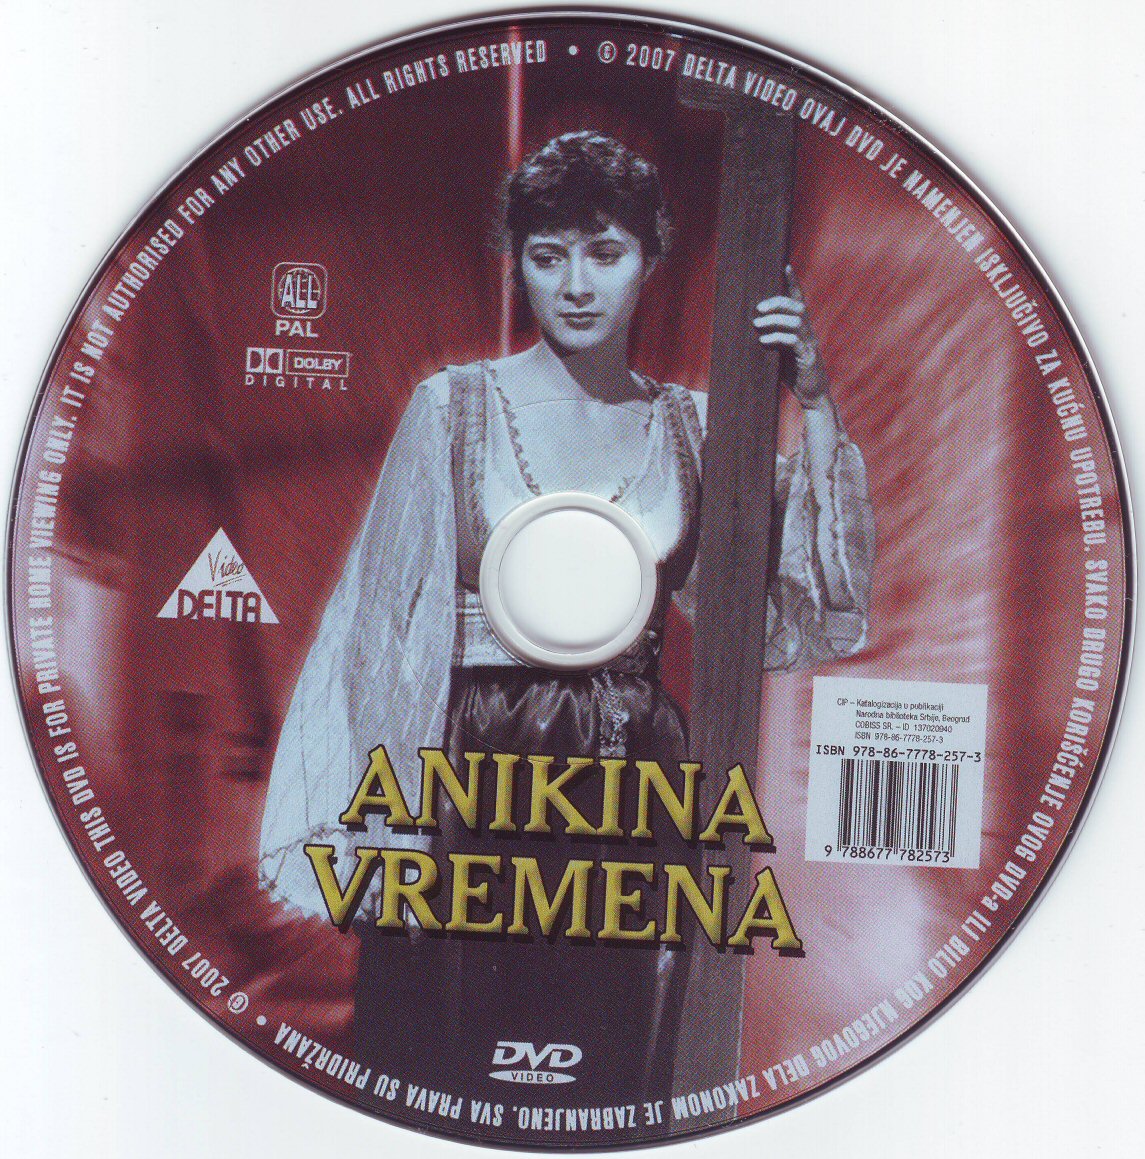 Click to view full size image -  DVD Cover - A - DVD - ANIKINA VREMENA - CD - DVD - ANIKINA VREMENA - CD.jpg